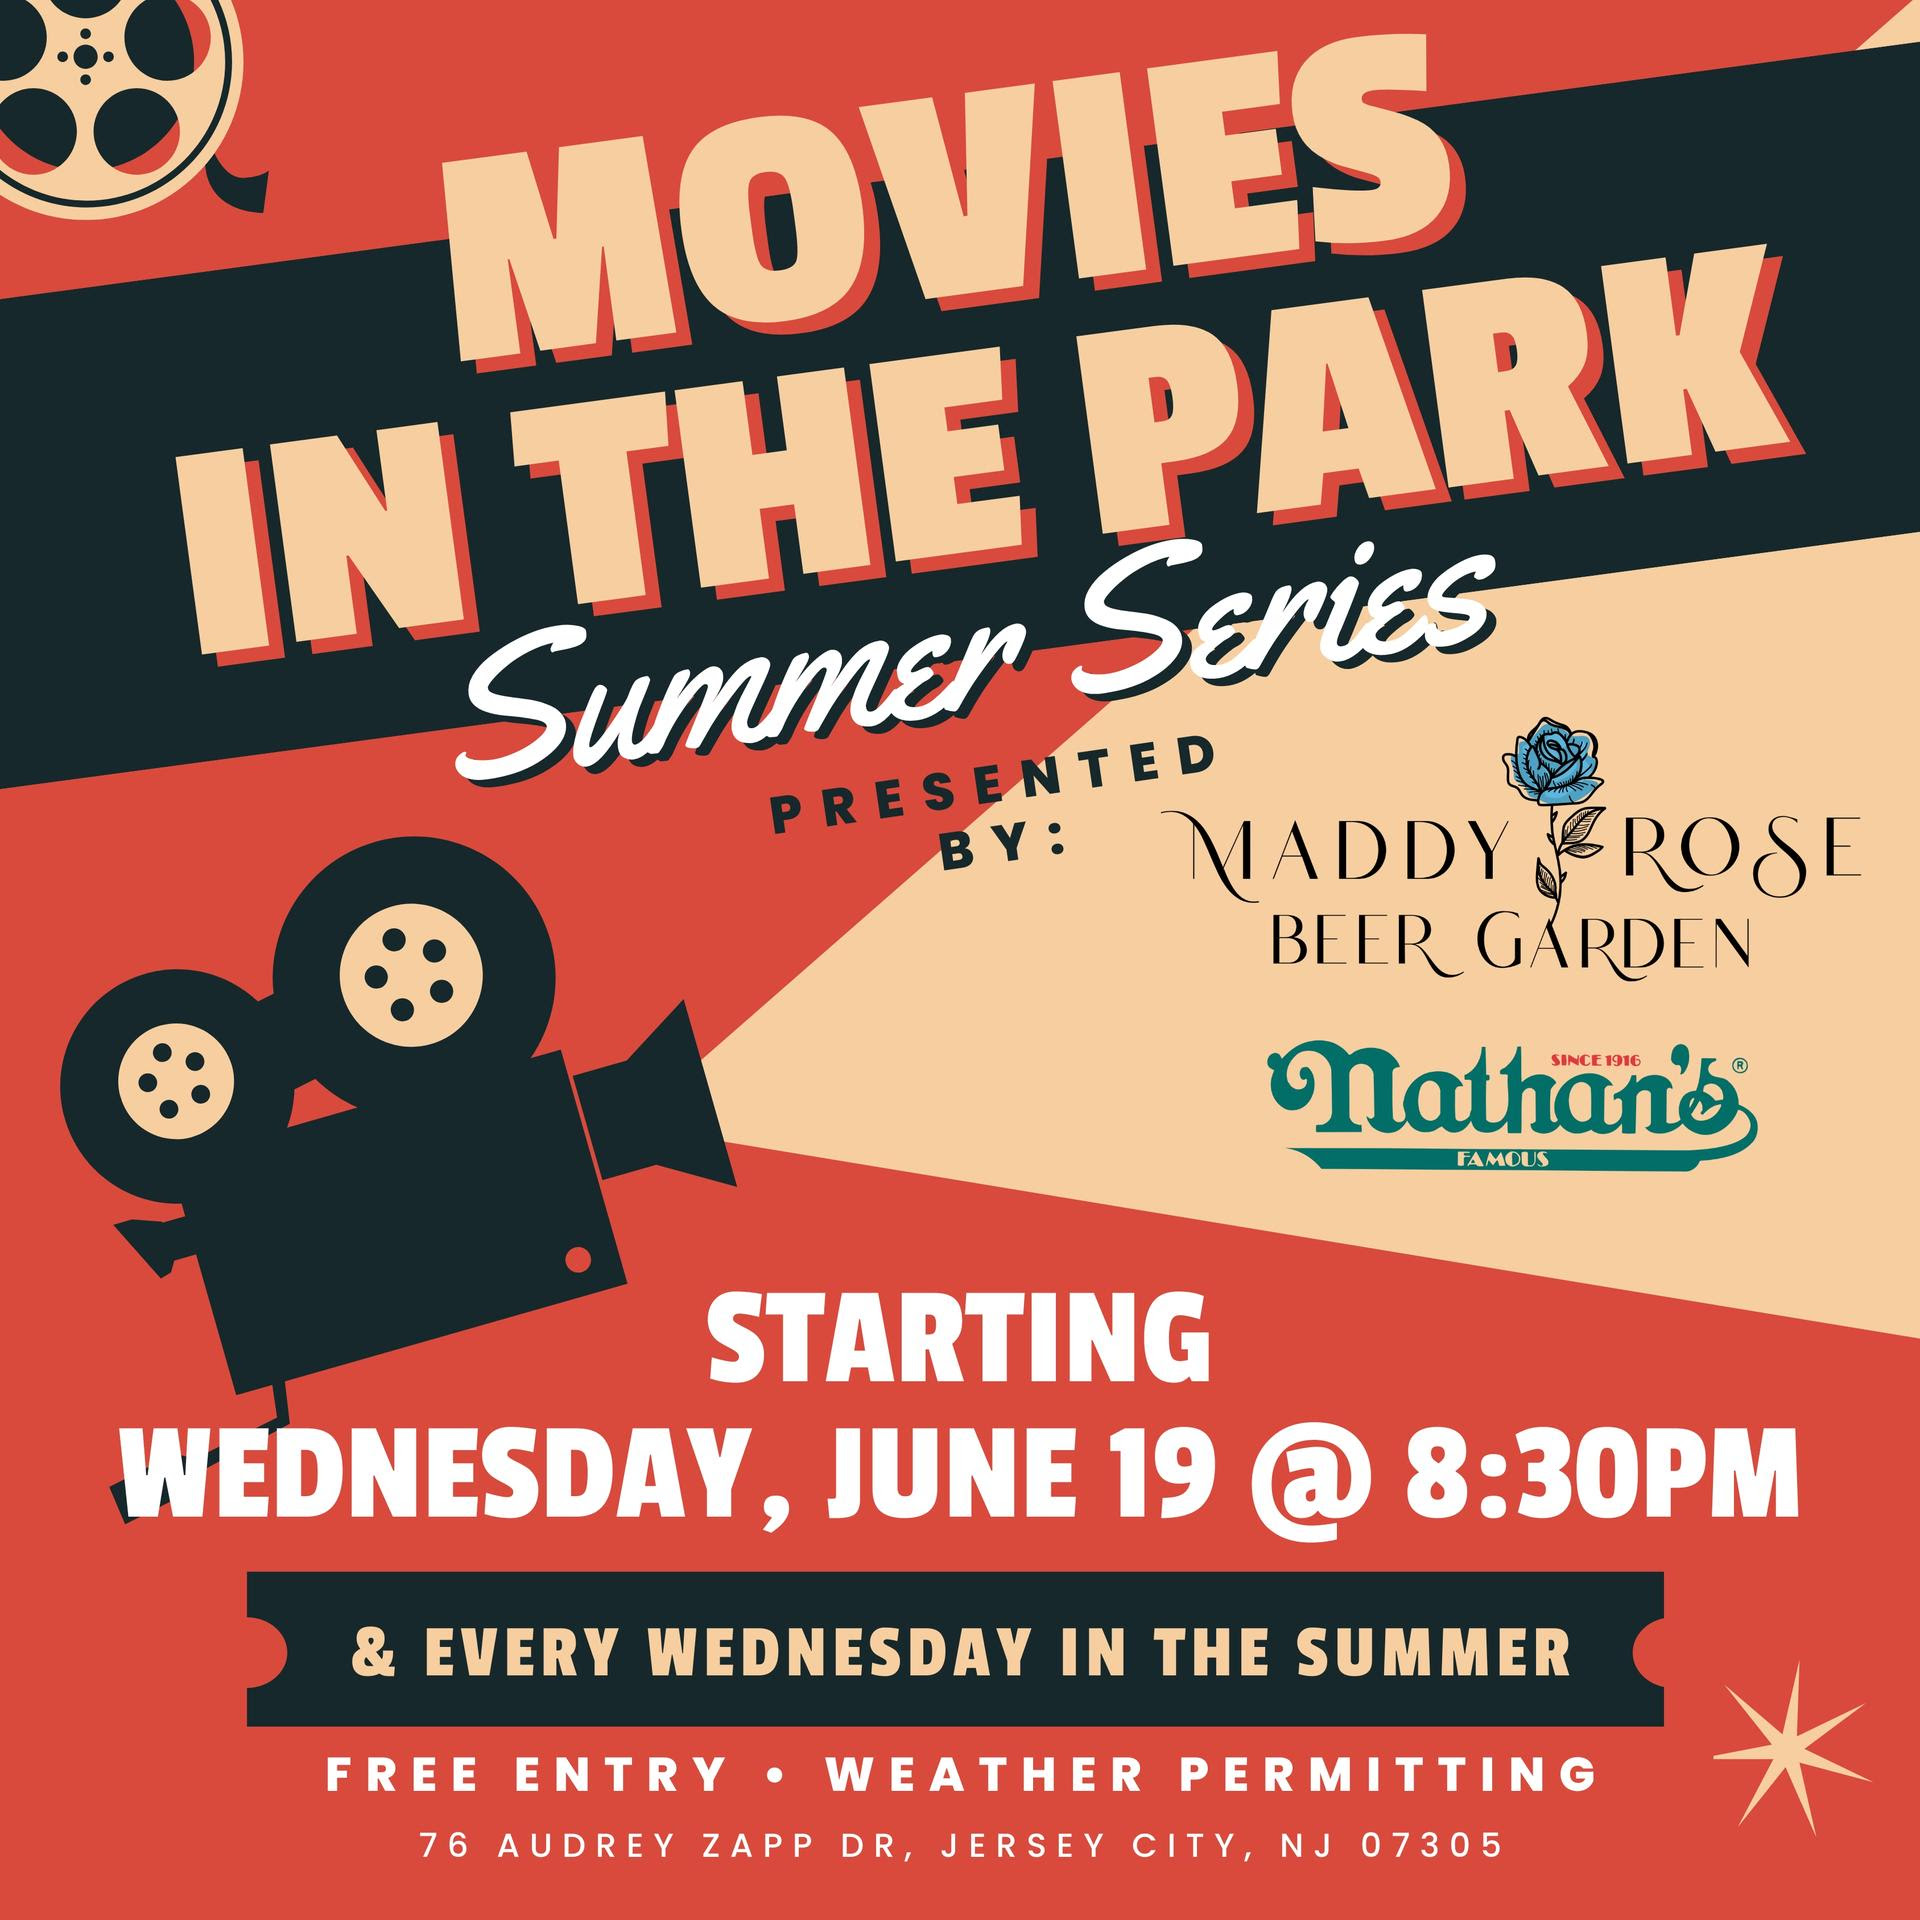 moives in the park summer series